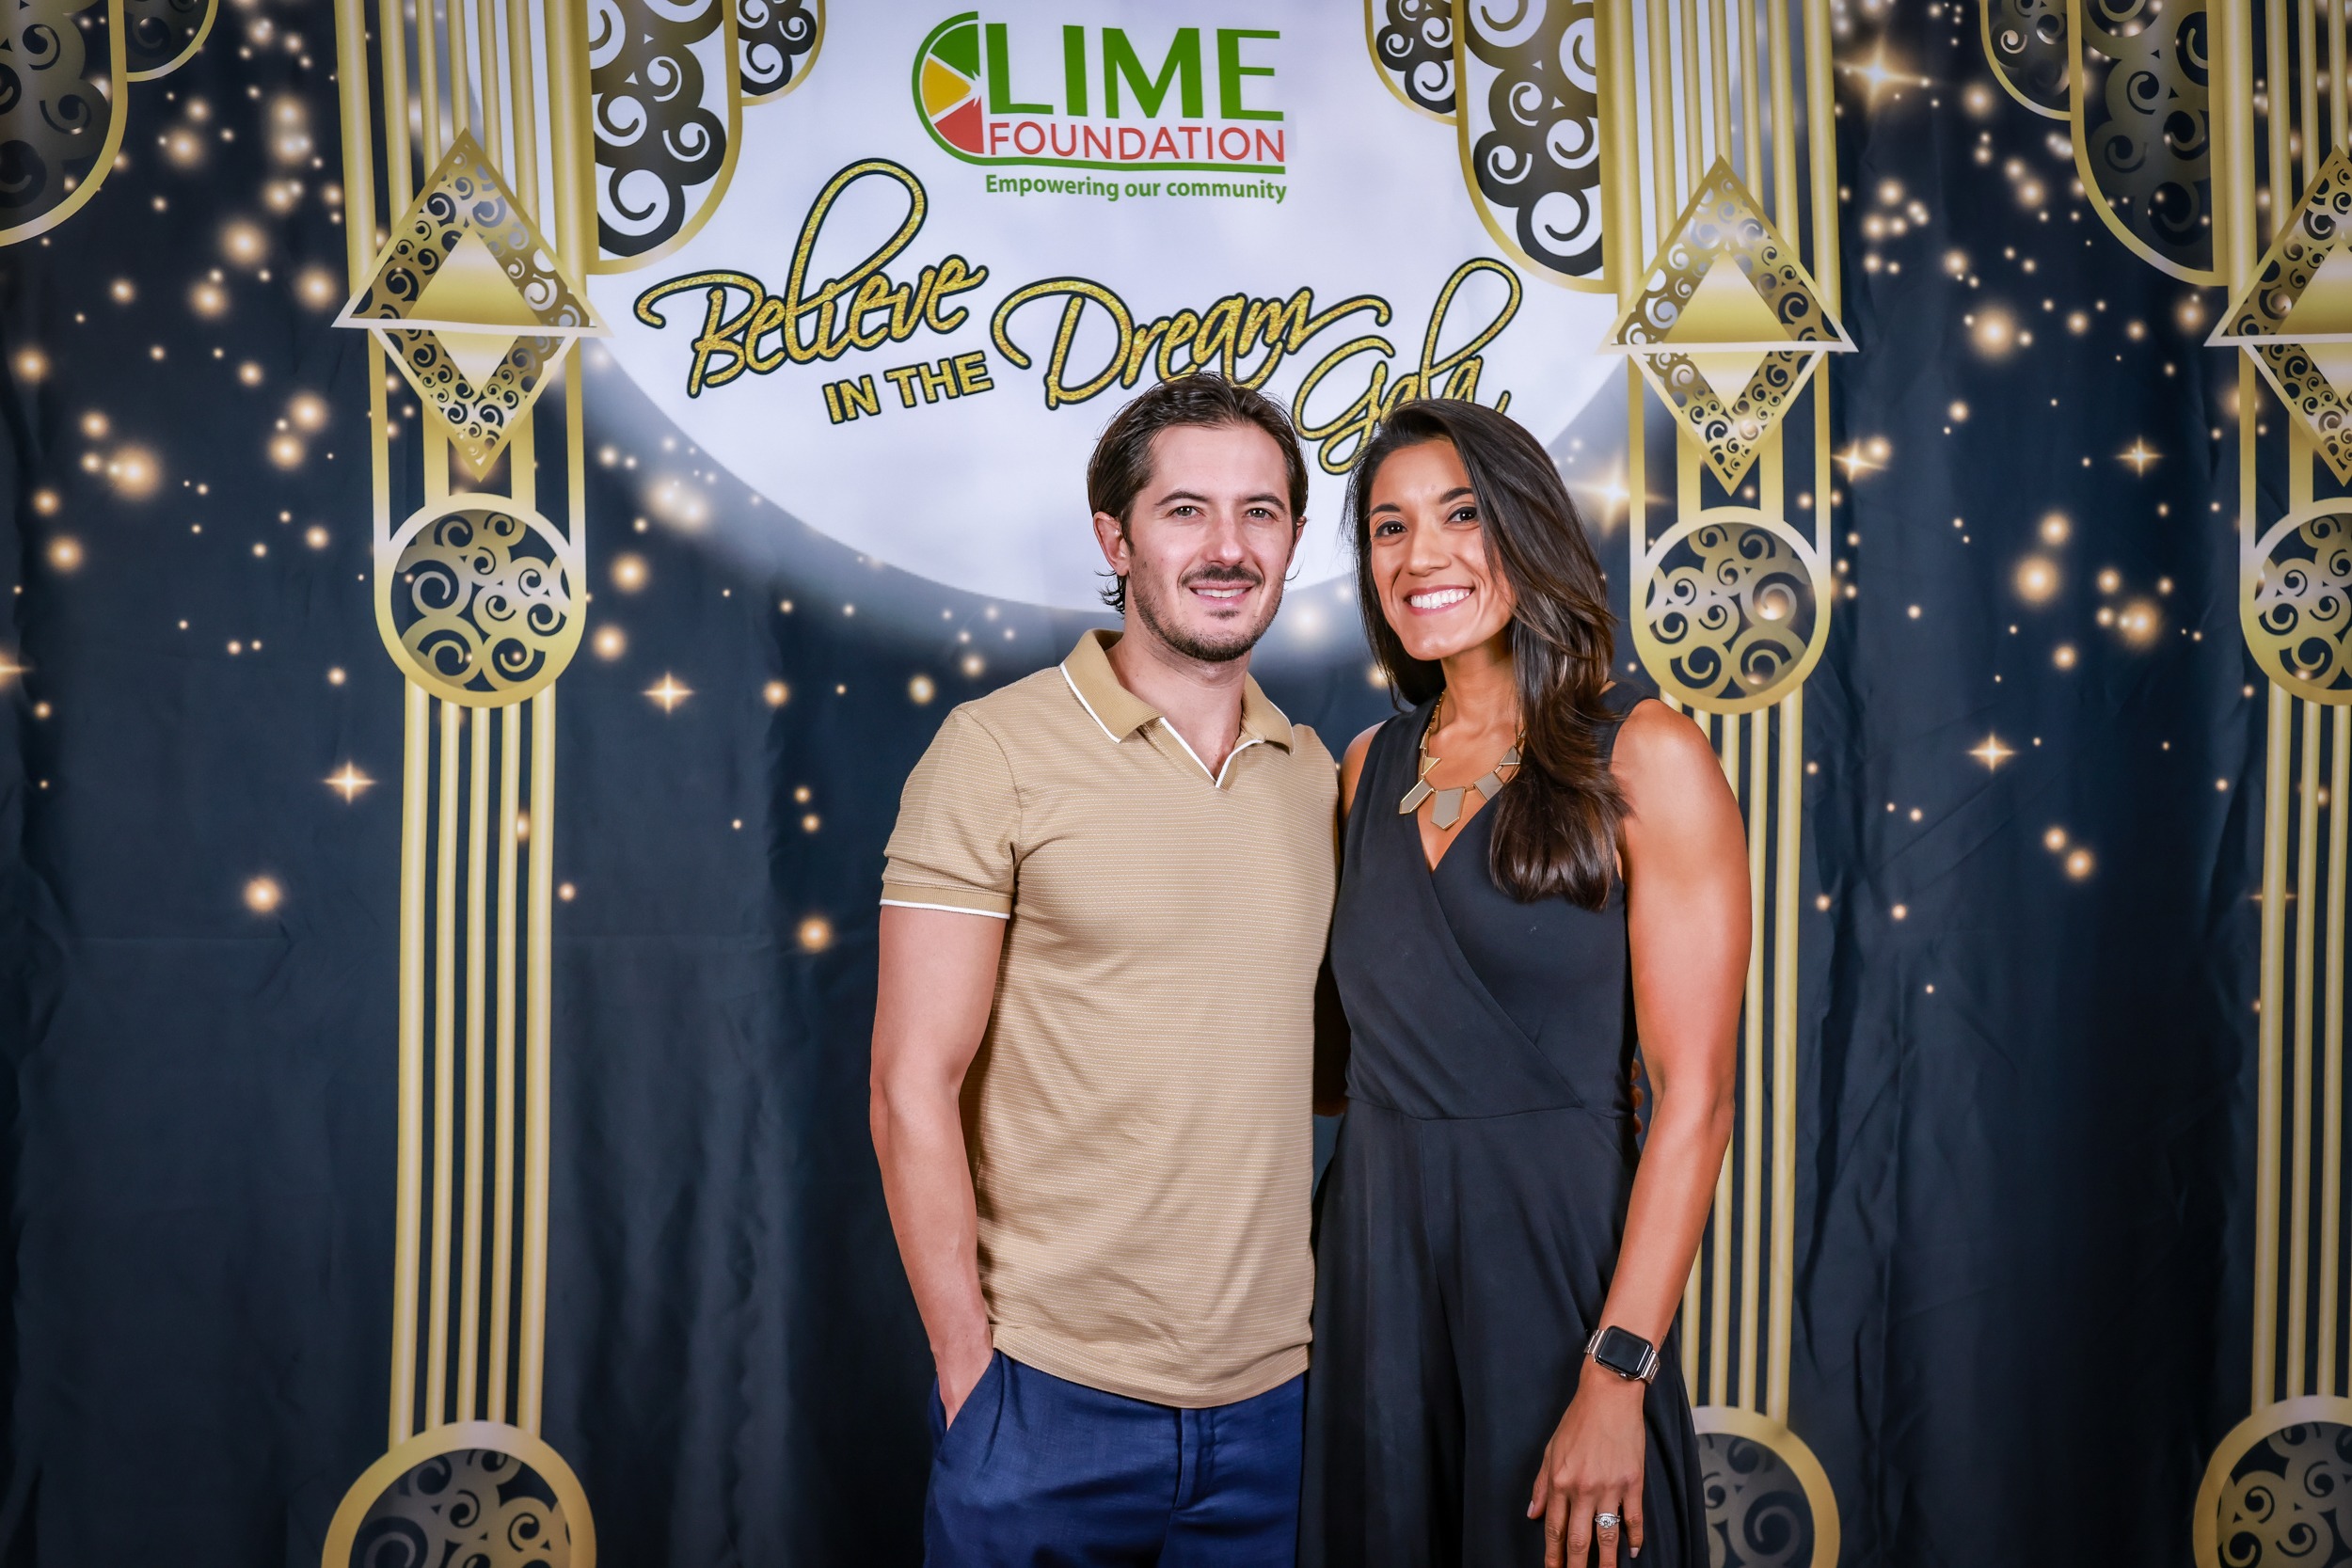 A man and woman posing for a photo in front of a backdrop at The LIME Foundation of Santa Rosa.